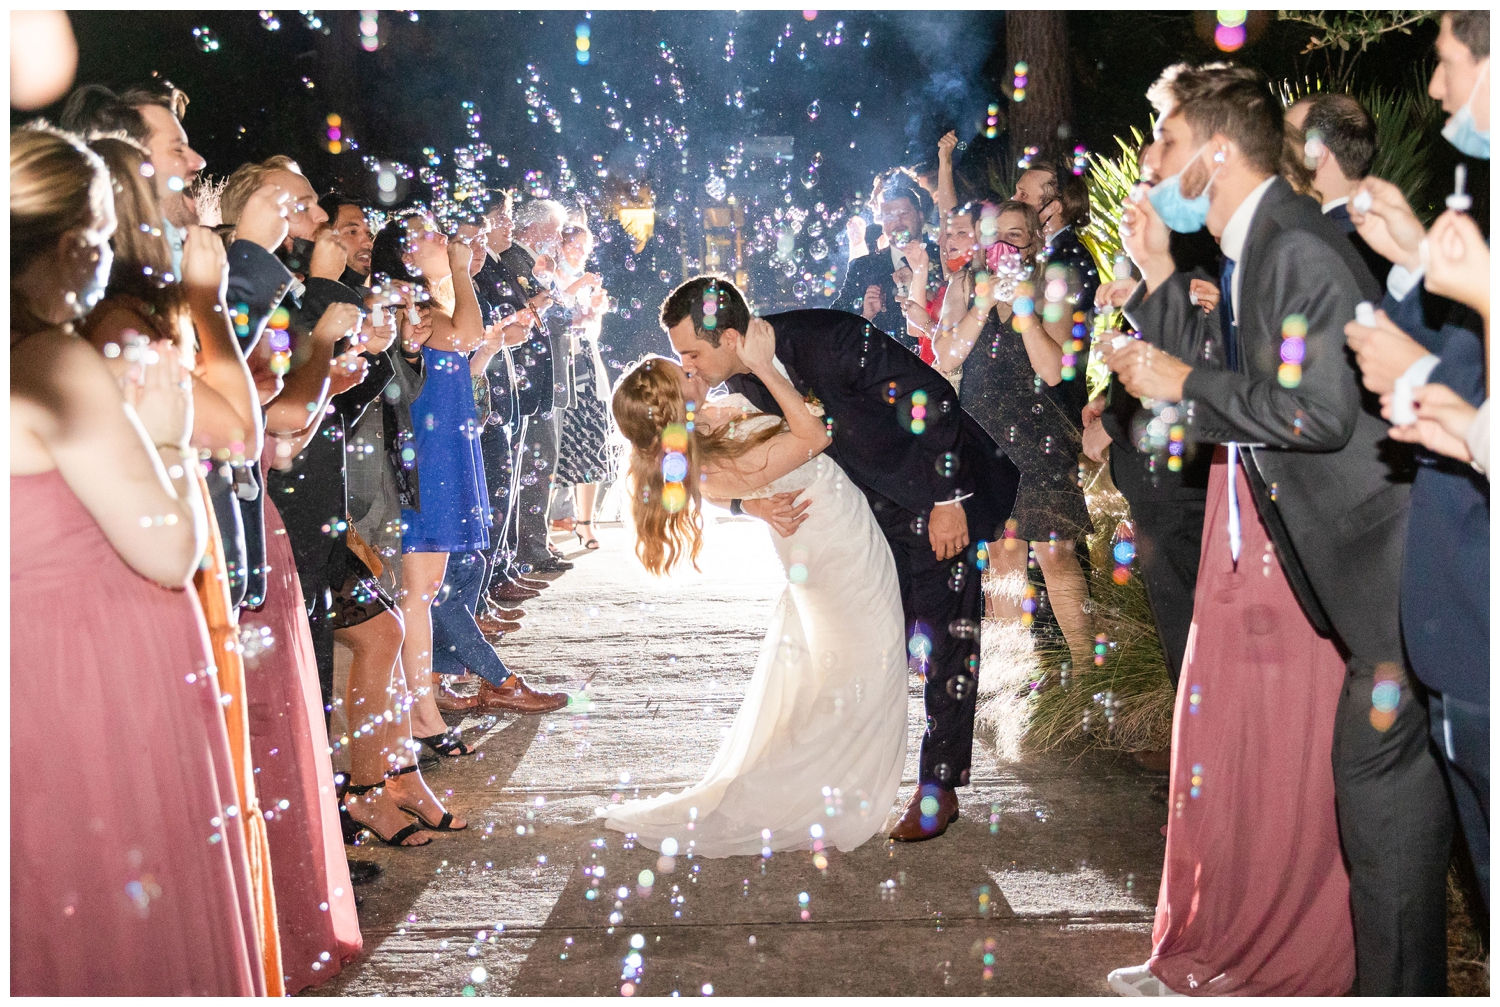 bride and groom kissing during wedding reception bubble exit